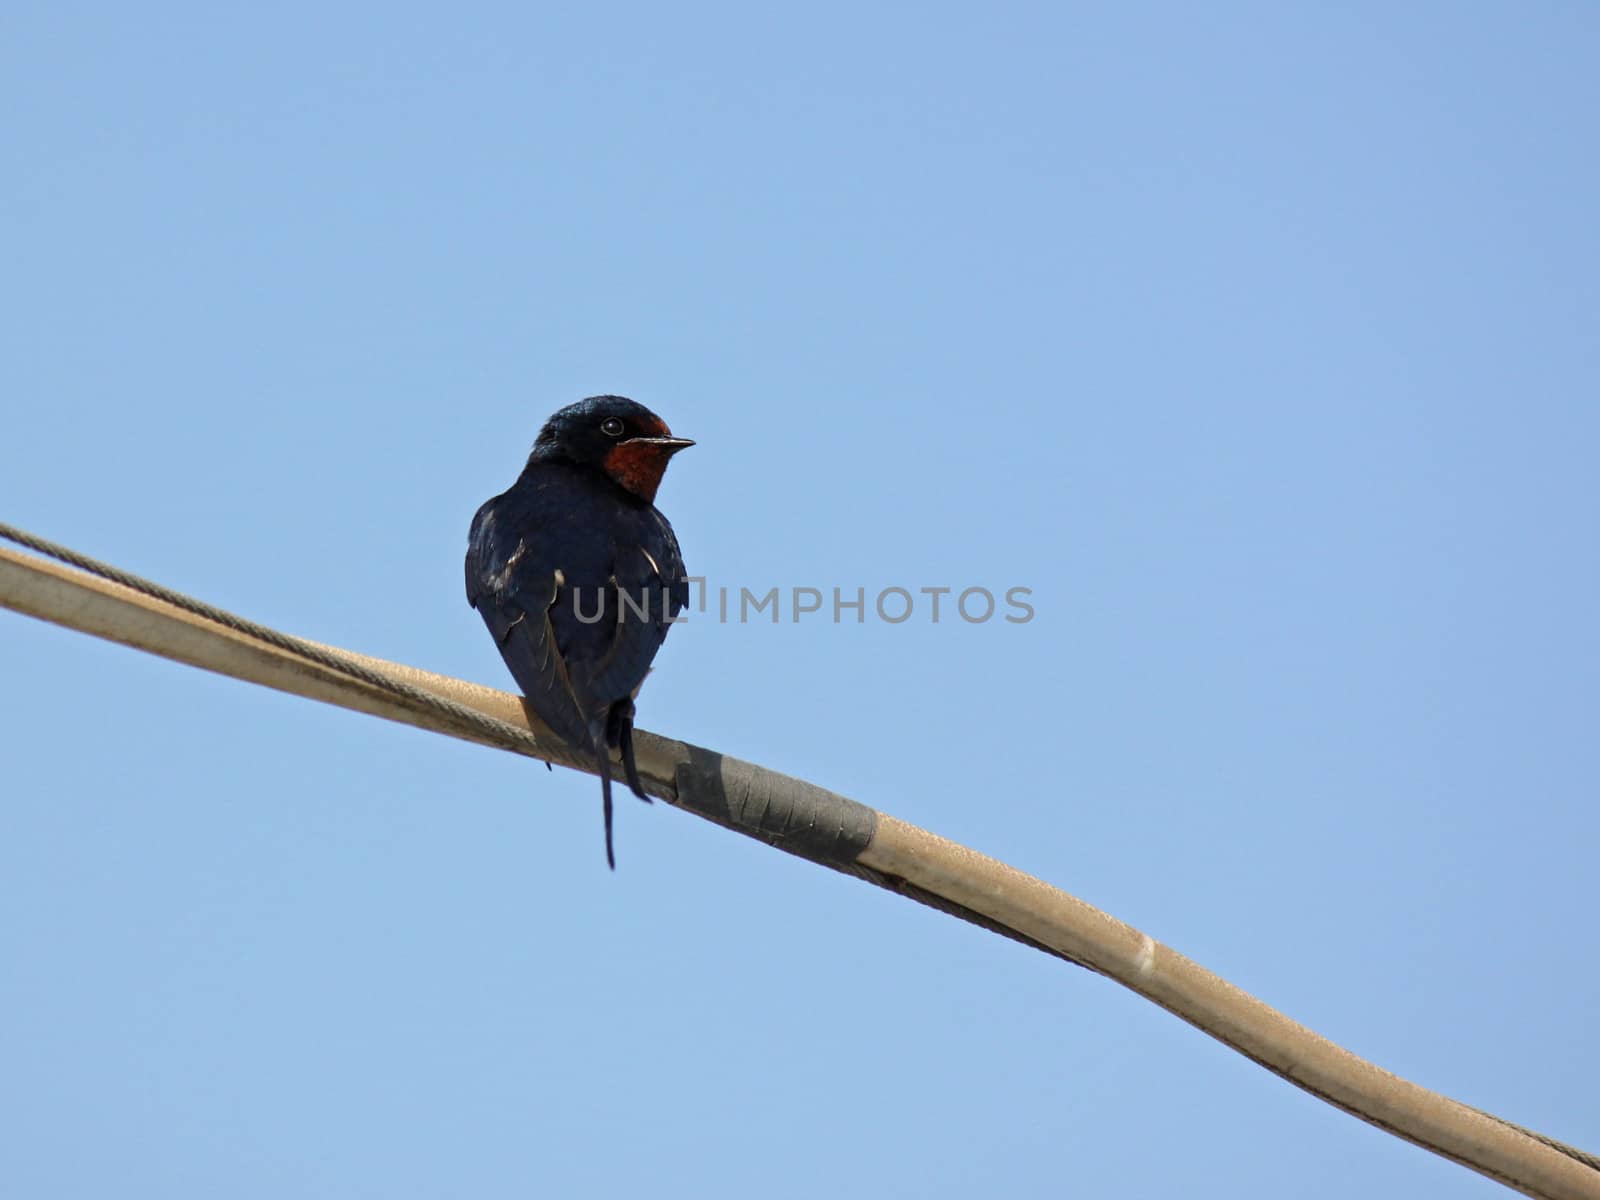 Barn Swallow sitting on cable over blue sky